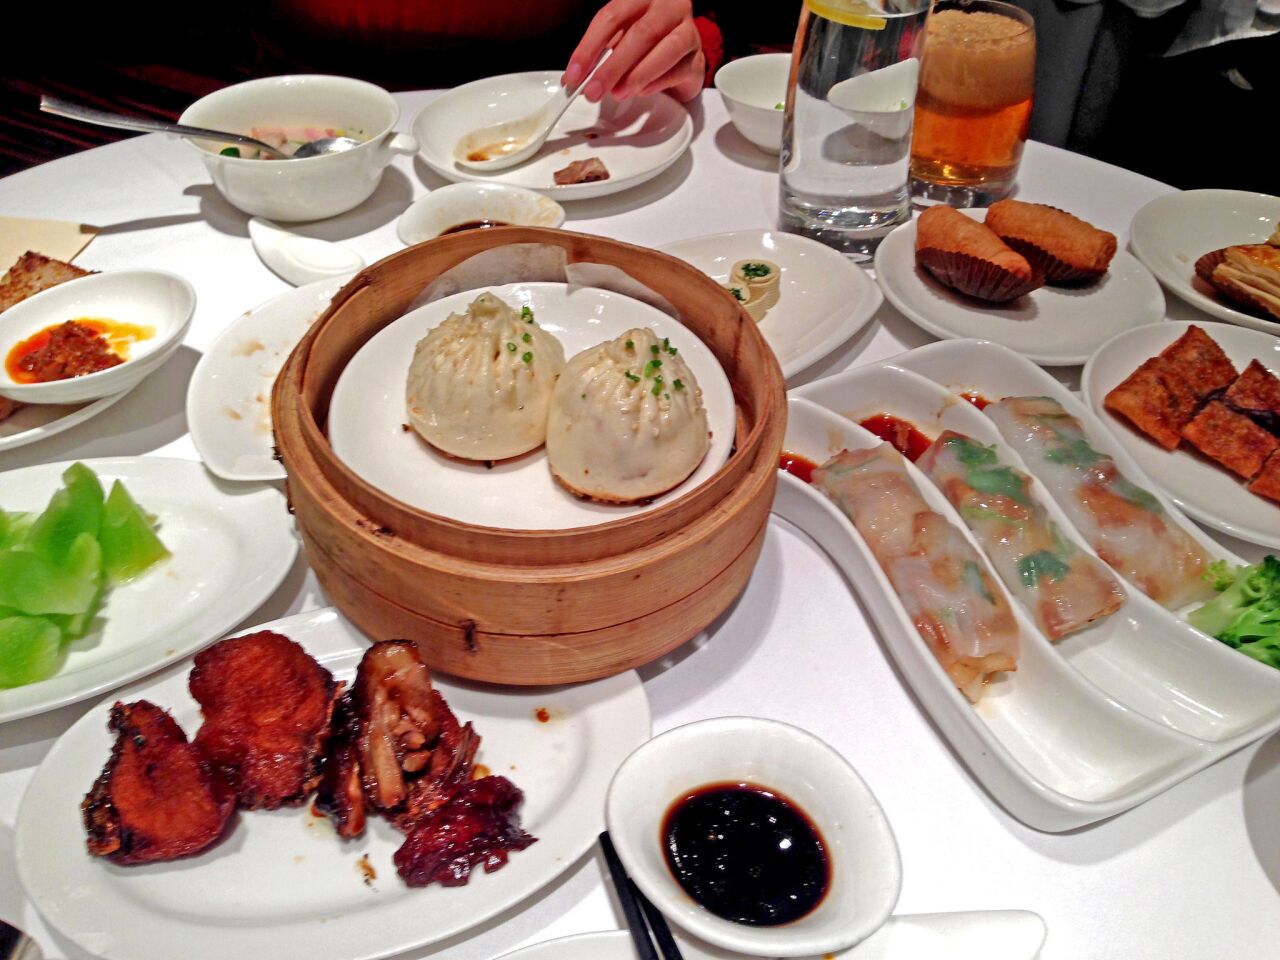 The all-you-can-eat weekend dim sum buffet at Lynn. The restaurant is located in the French Concession, the popular Shanghai neighborhood that until the mid-20th century was still considered French soil.